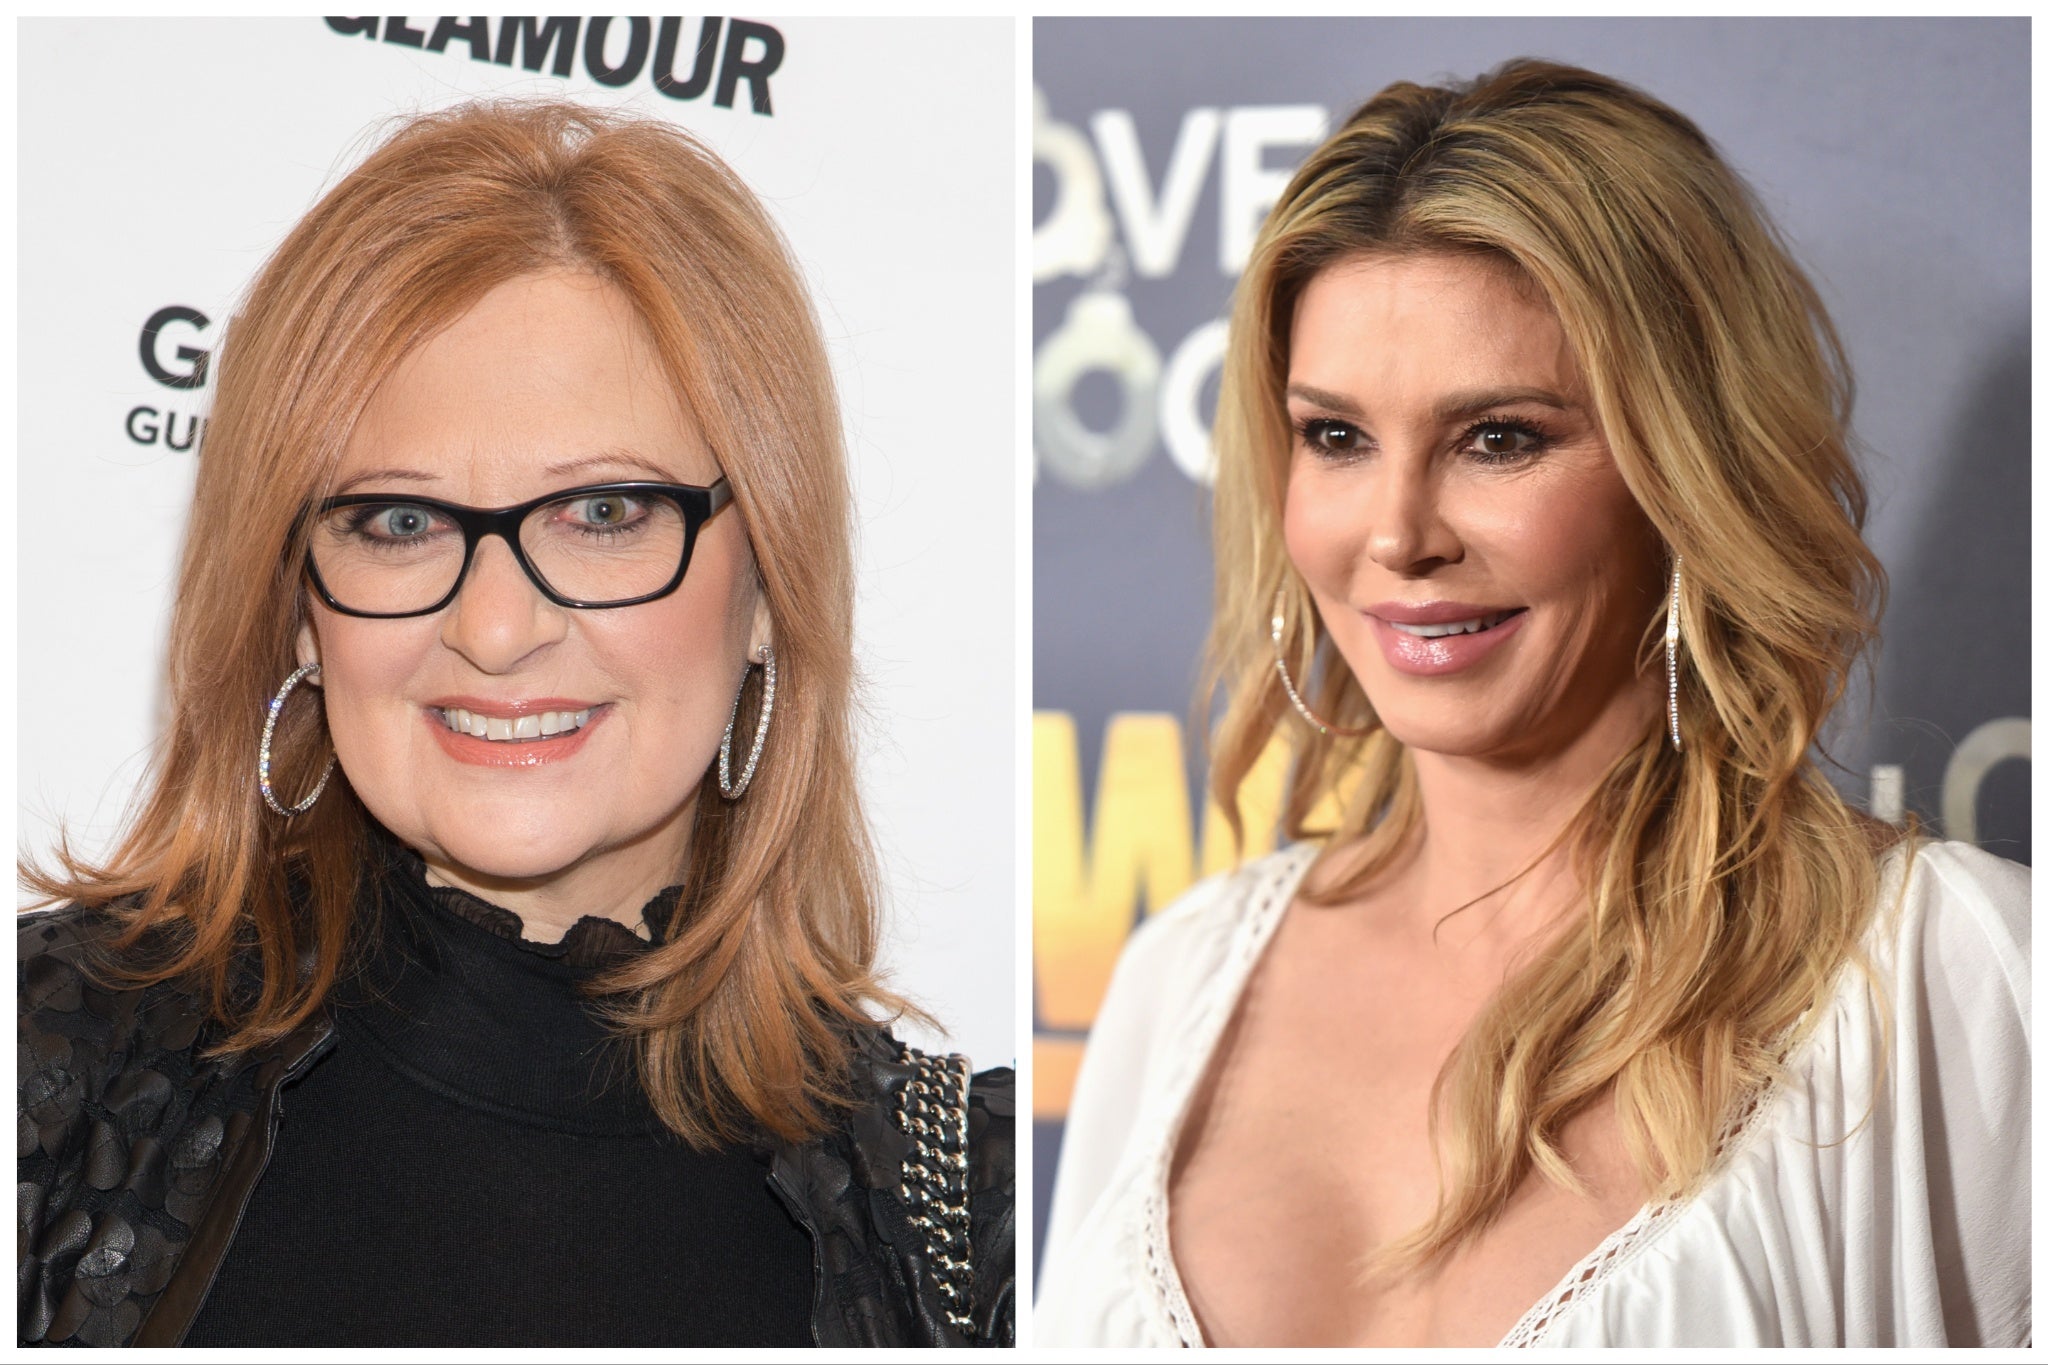 Real Housewives: Caroline Manzo (left) and Brandi Glanville